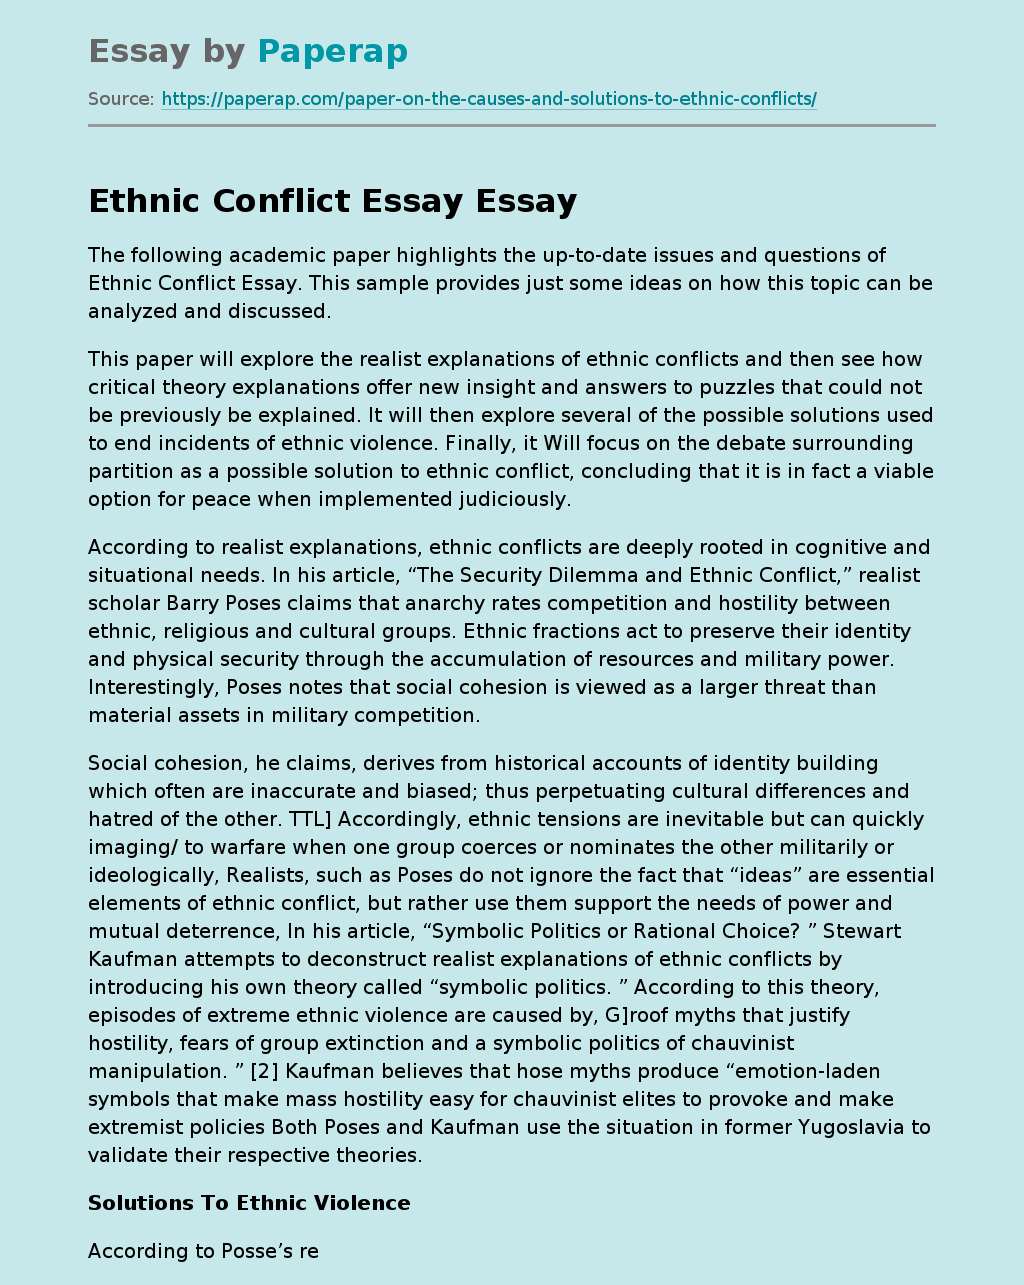 Solutions To Ethnic Violence